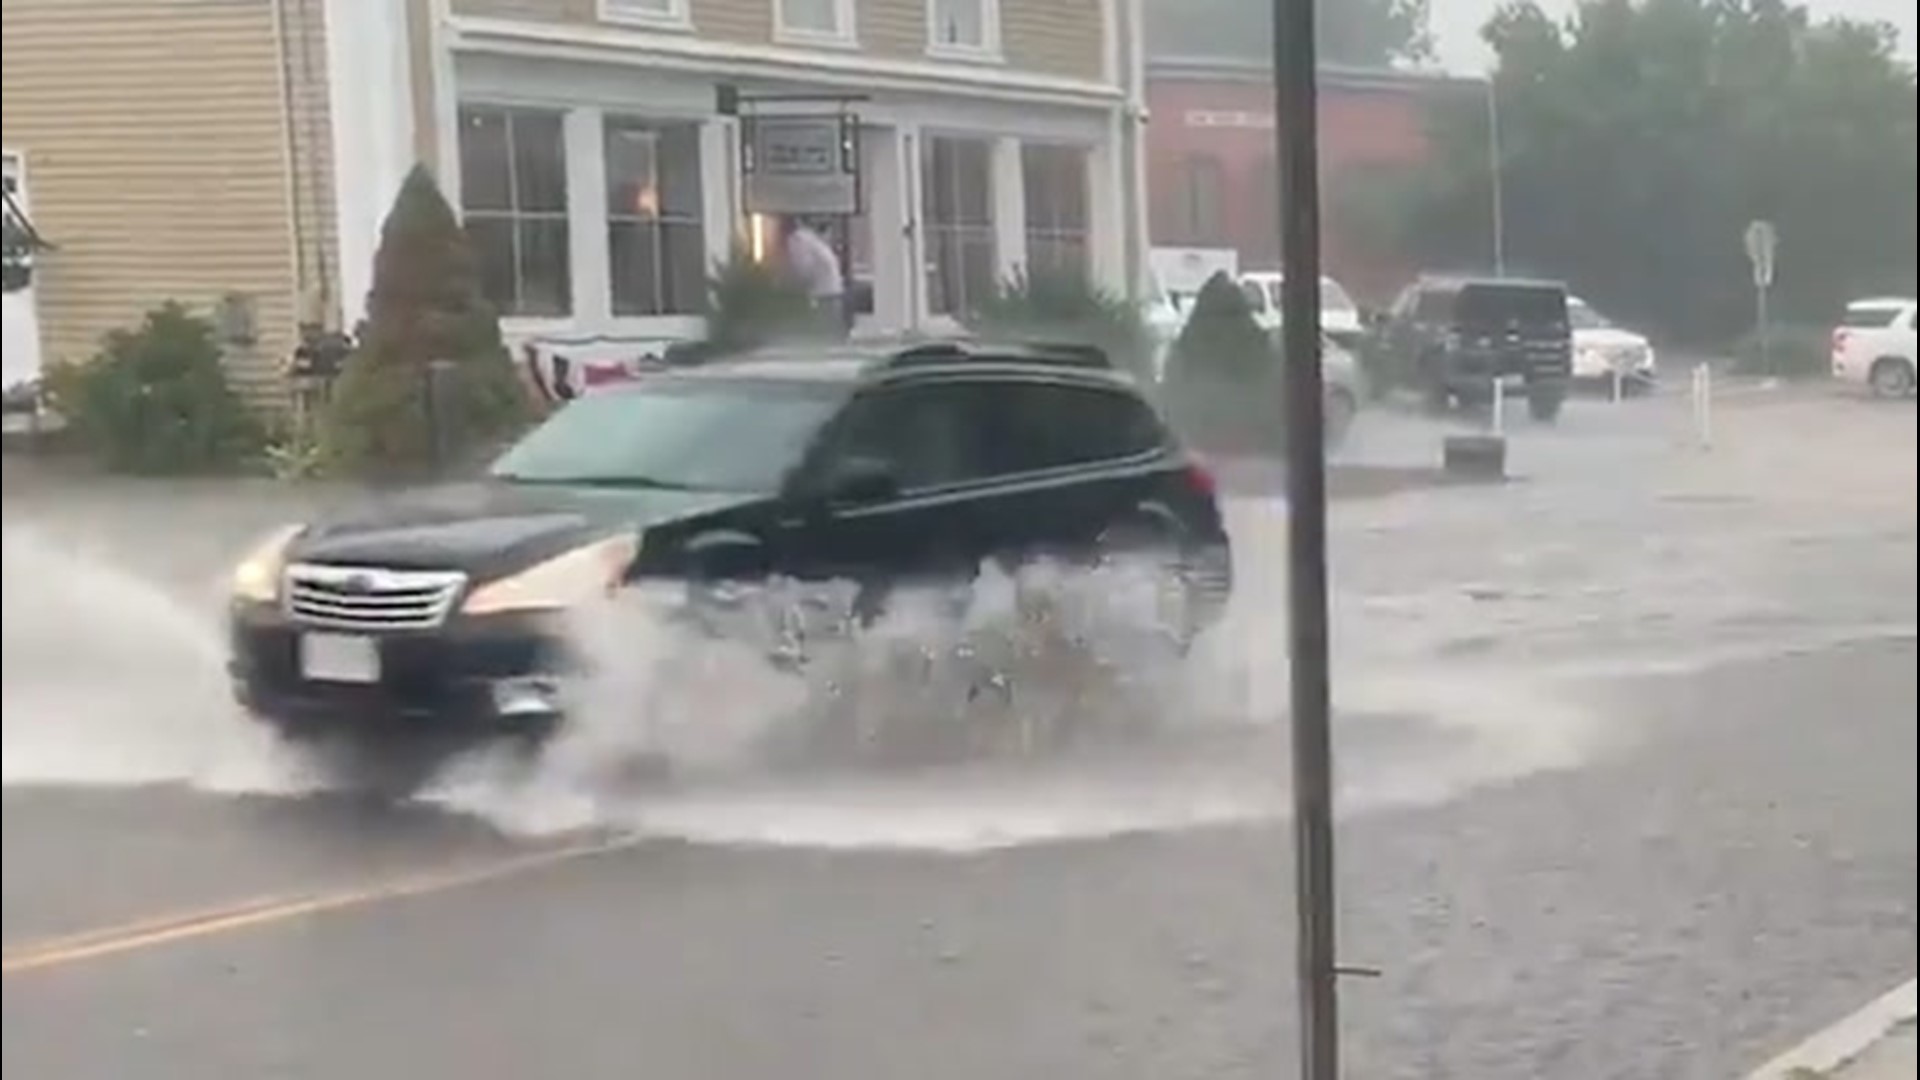 Roads in Wakefield, Rhode Island, were inundated by floodwaters on July 14 after a fast-moving storm bought heavy downpours in the area.